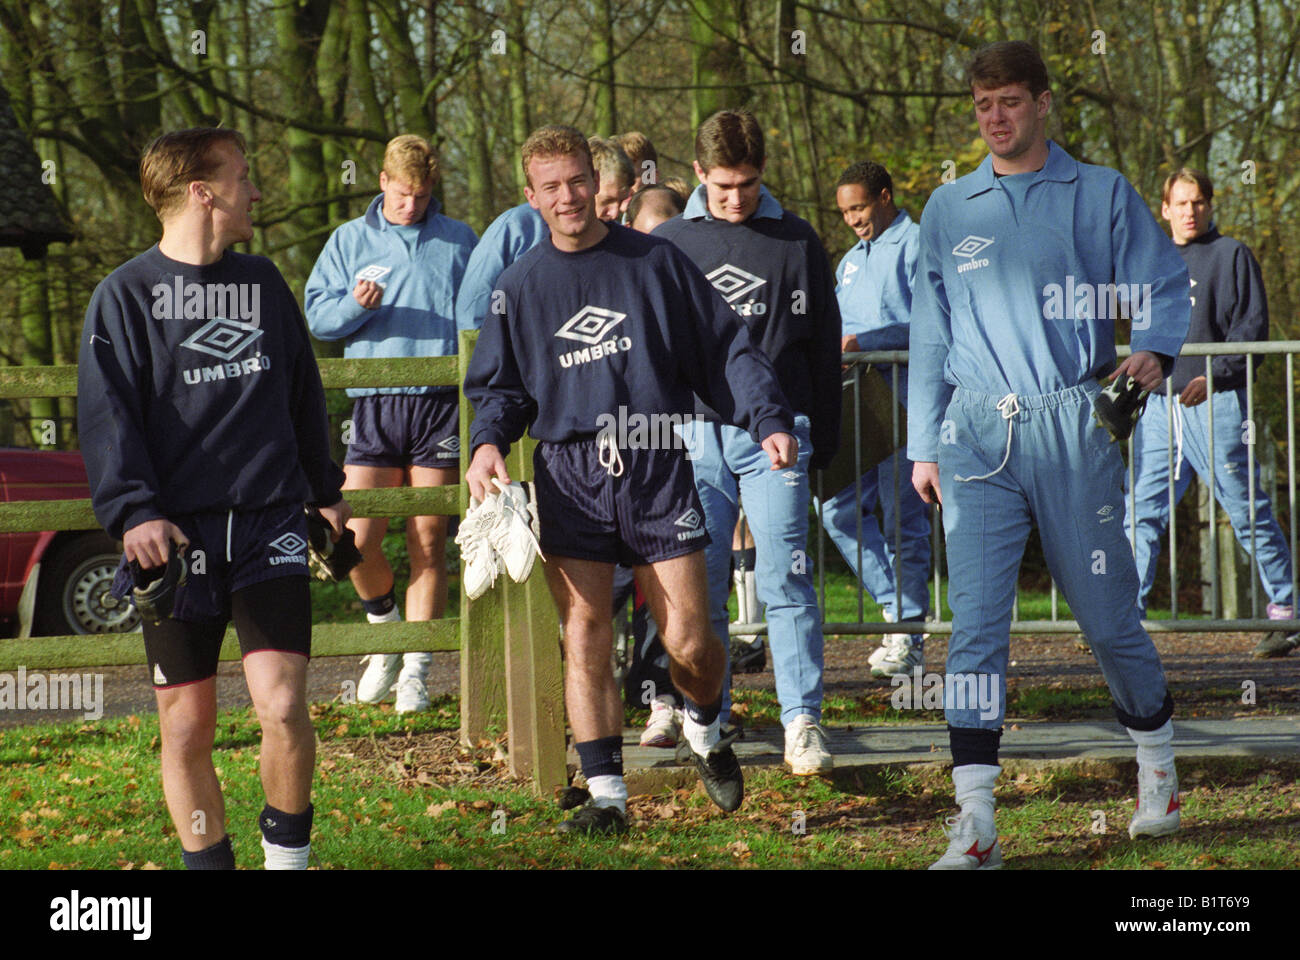 The England Football Squad Training At Lilleshall 13 11 92 Lee Dixon Alan Shearer And Gary Pallister Lead The Way Stock Photo Alamy